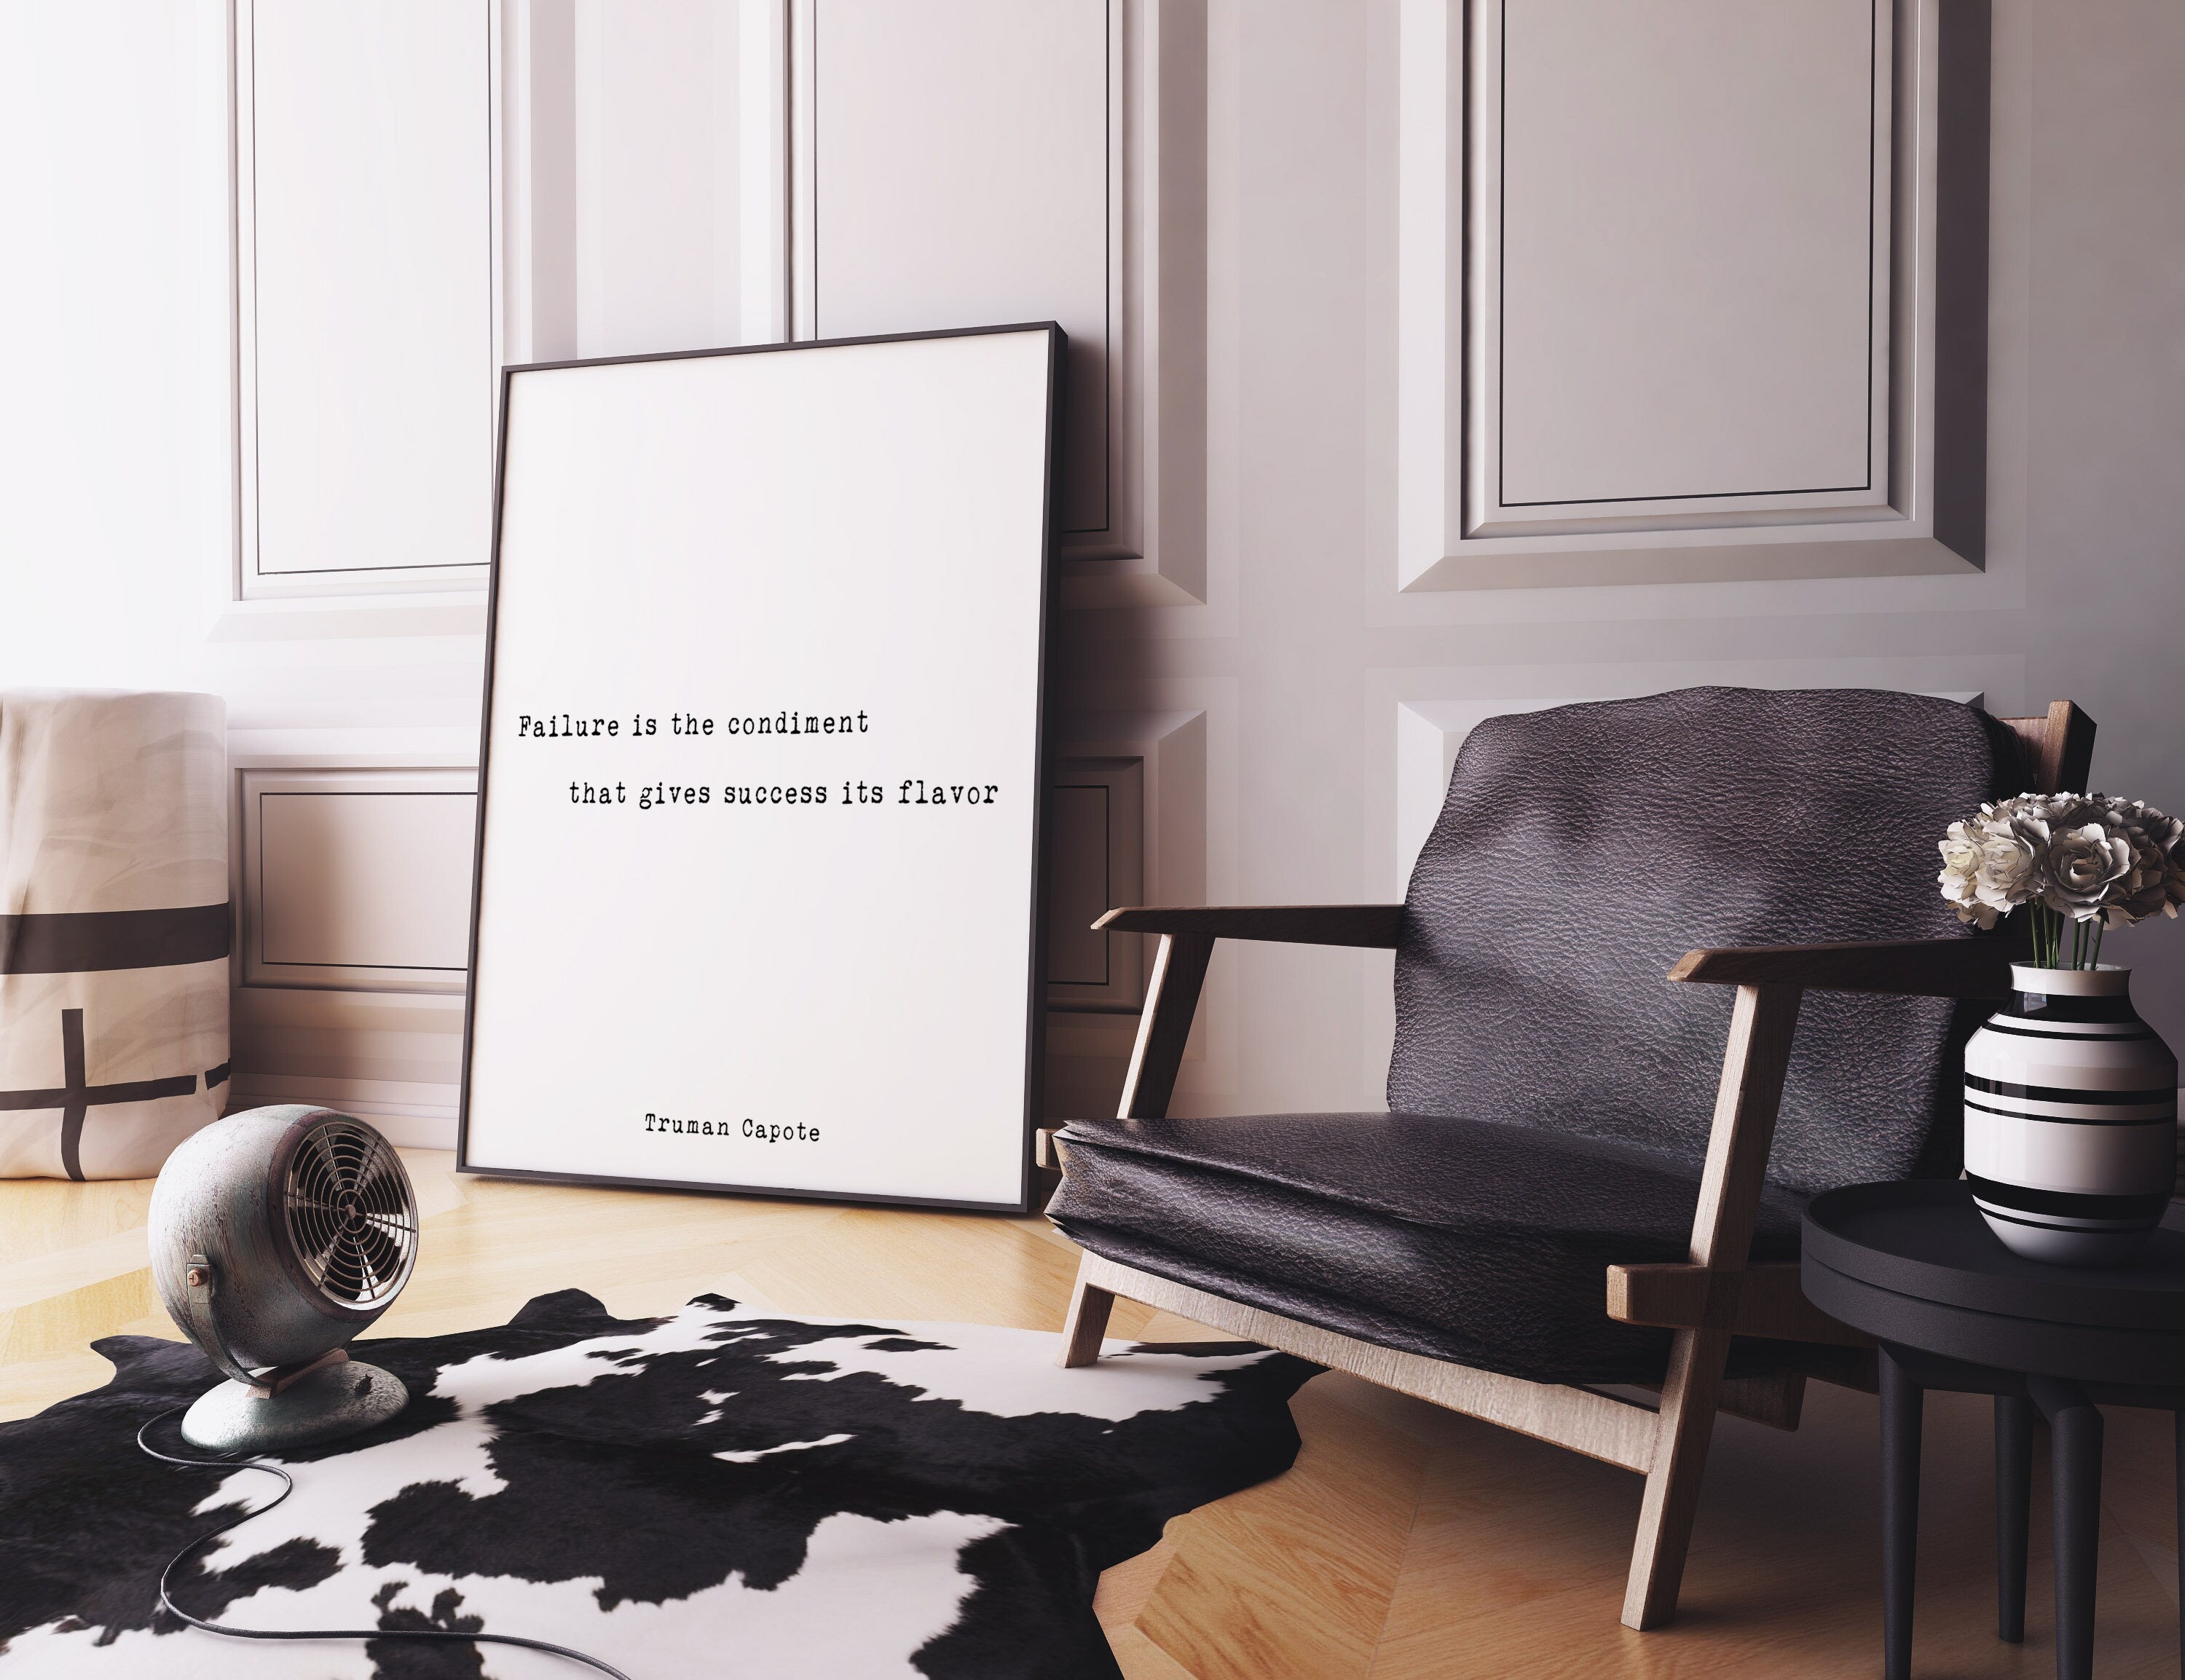 Truman Capote Quote Print, Failure is the condiment that gives success its flavor. Wall Decor